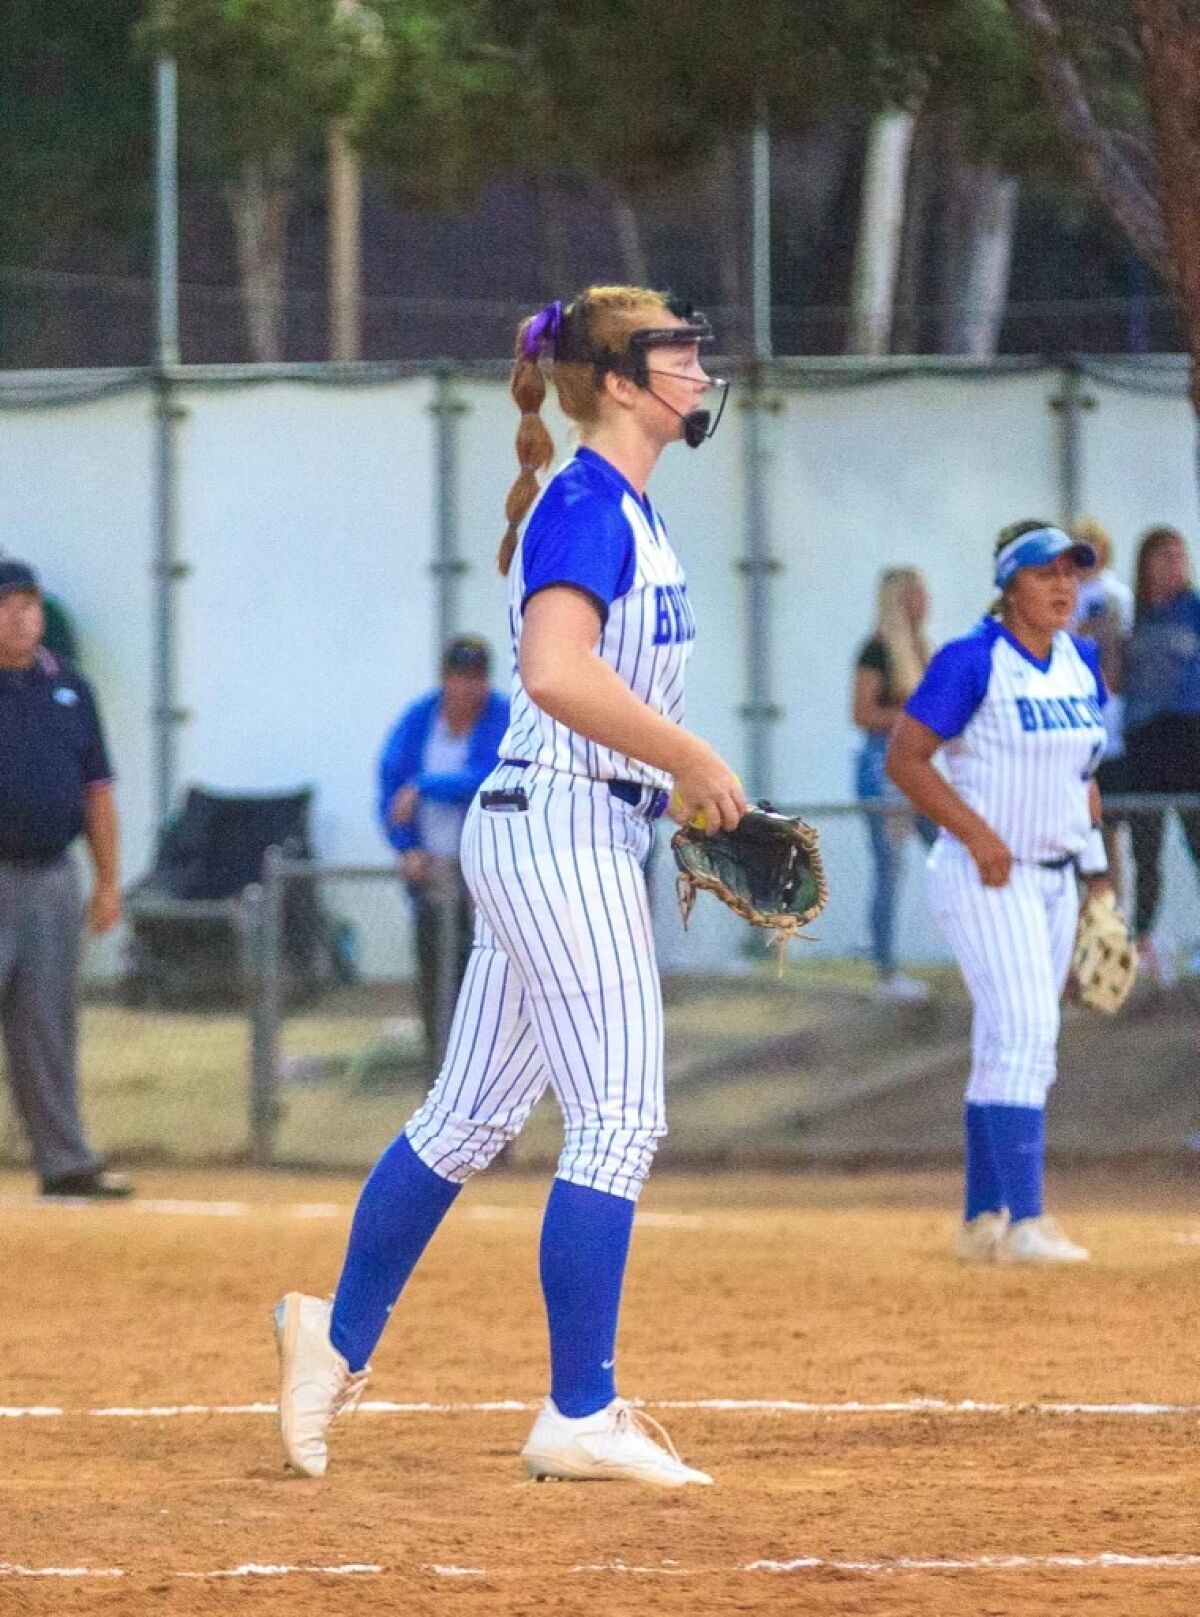 Poway High's Maddie Hulse had a breakout junior season in 2022 — 18-8 with a 1.03 ERA in 169 innings of work.